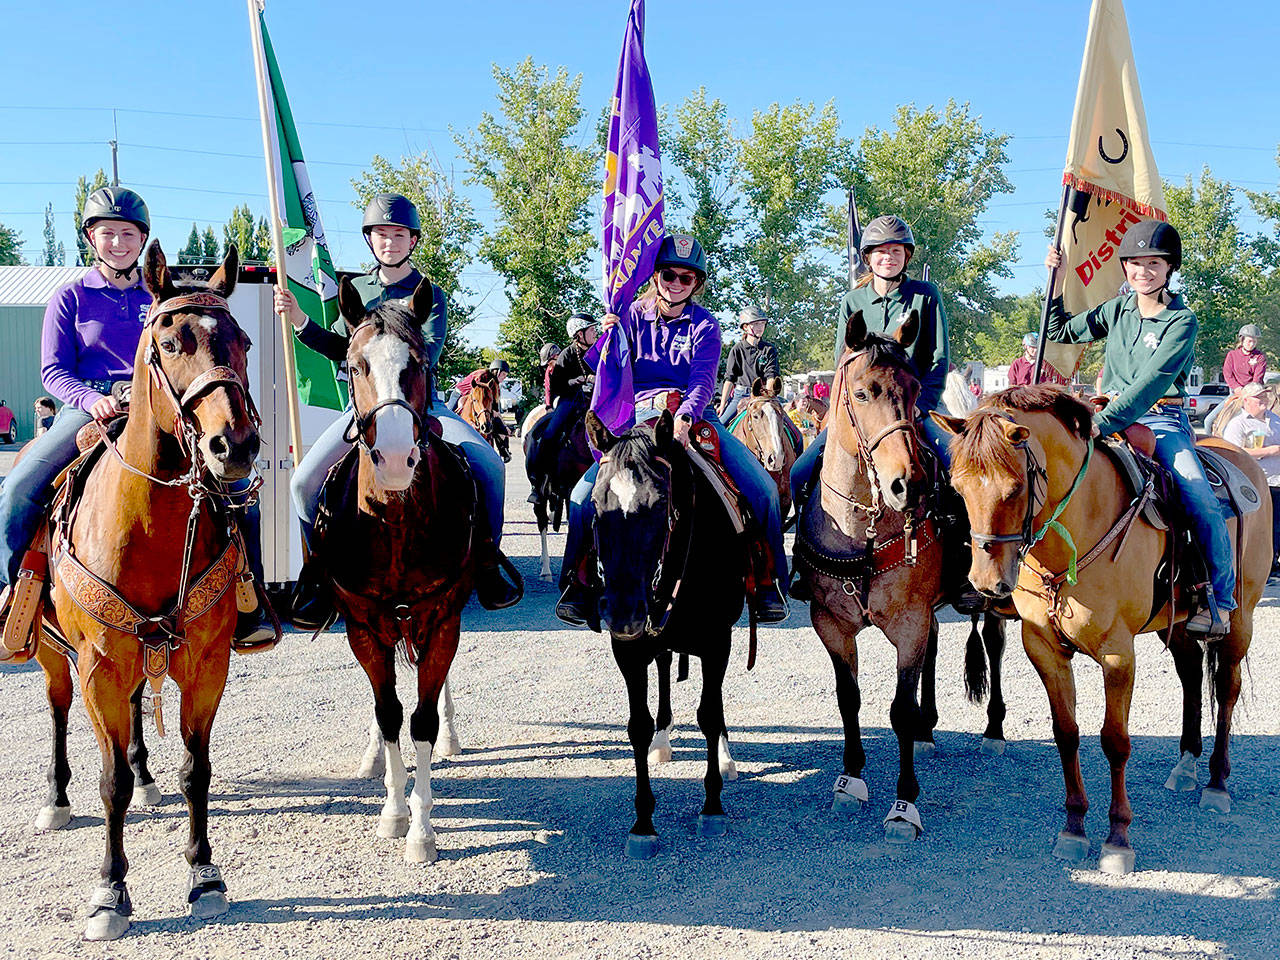 Local prep equestrian riders gear up for the Grand Entry at the state finals in Moses Lake in mid-June. They include, from left, Sequim rider Libby Swanberg, Port Angeles’ Sara Holland, Sequim’s Keri Tucker, and Port Angeles riders Amelia Kinney and Sidney Huttonn. Submitted photo